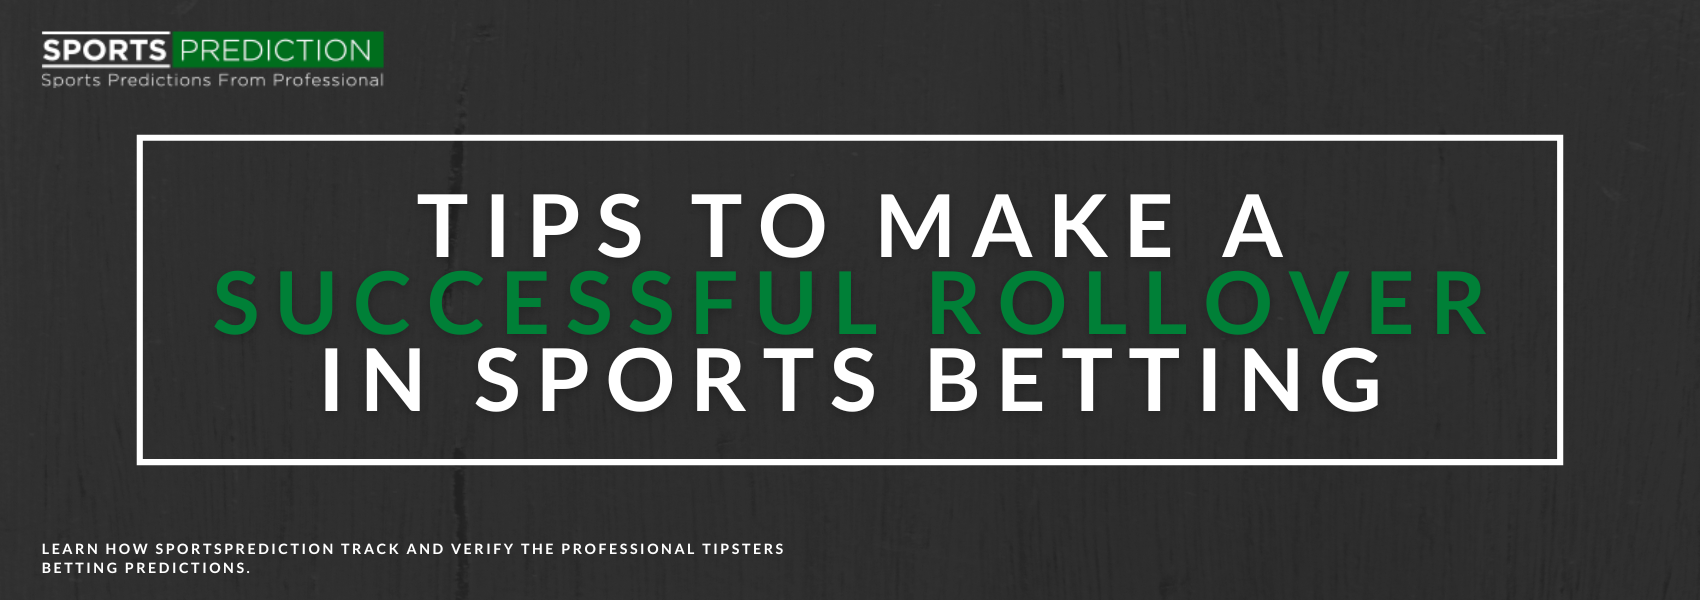 How Can I Make a Successful Rollover In Sports Betting?